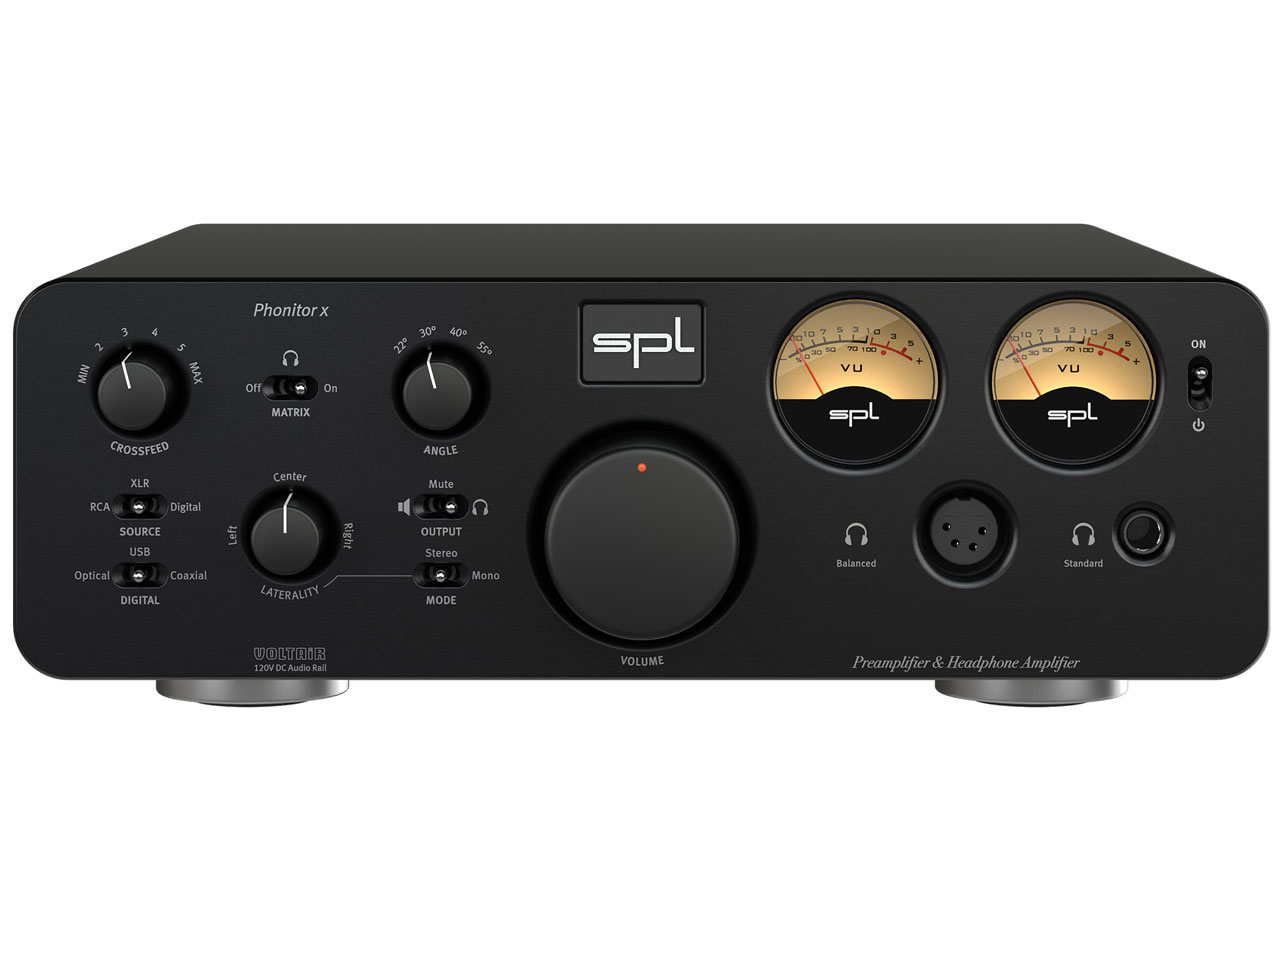 Phonitor x With DAC768xs [Black]